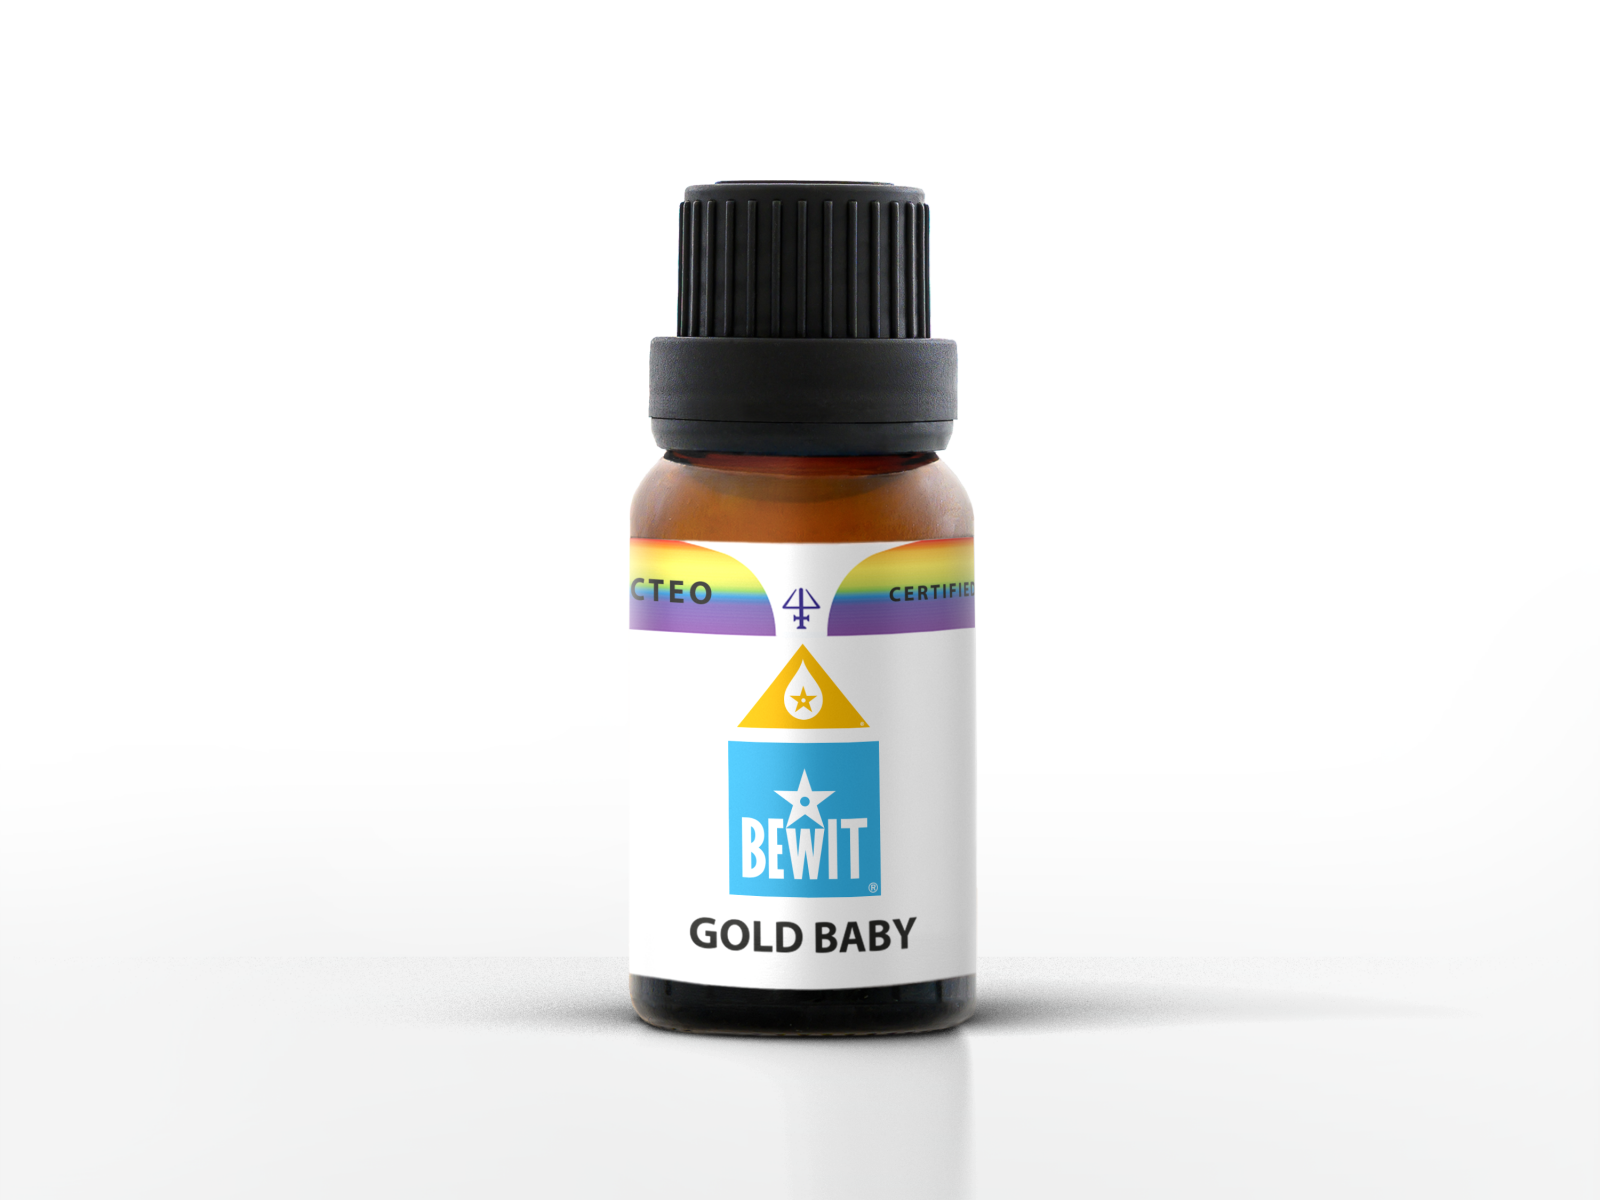 BEWIT GOLD BABY - 100% natural essential oil blend in CTEO® quality